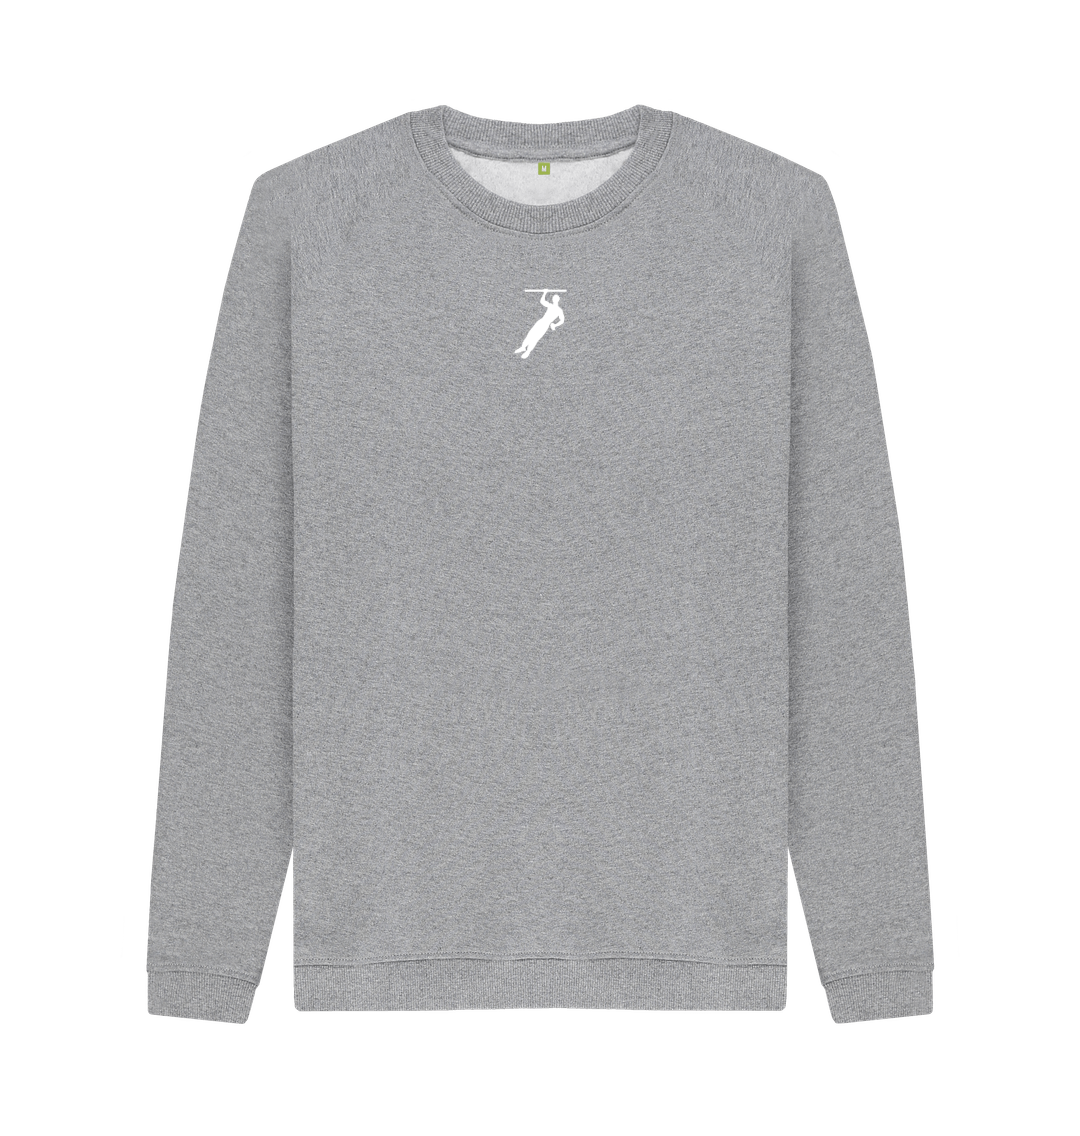 Light Heather Crew Kneck Sweater with white printed logo